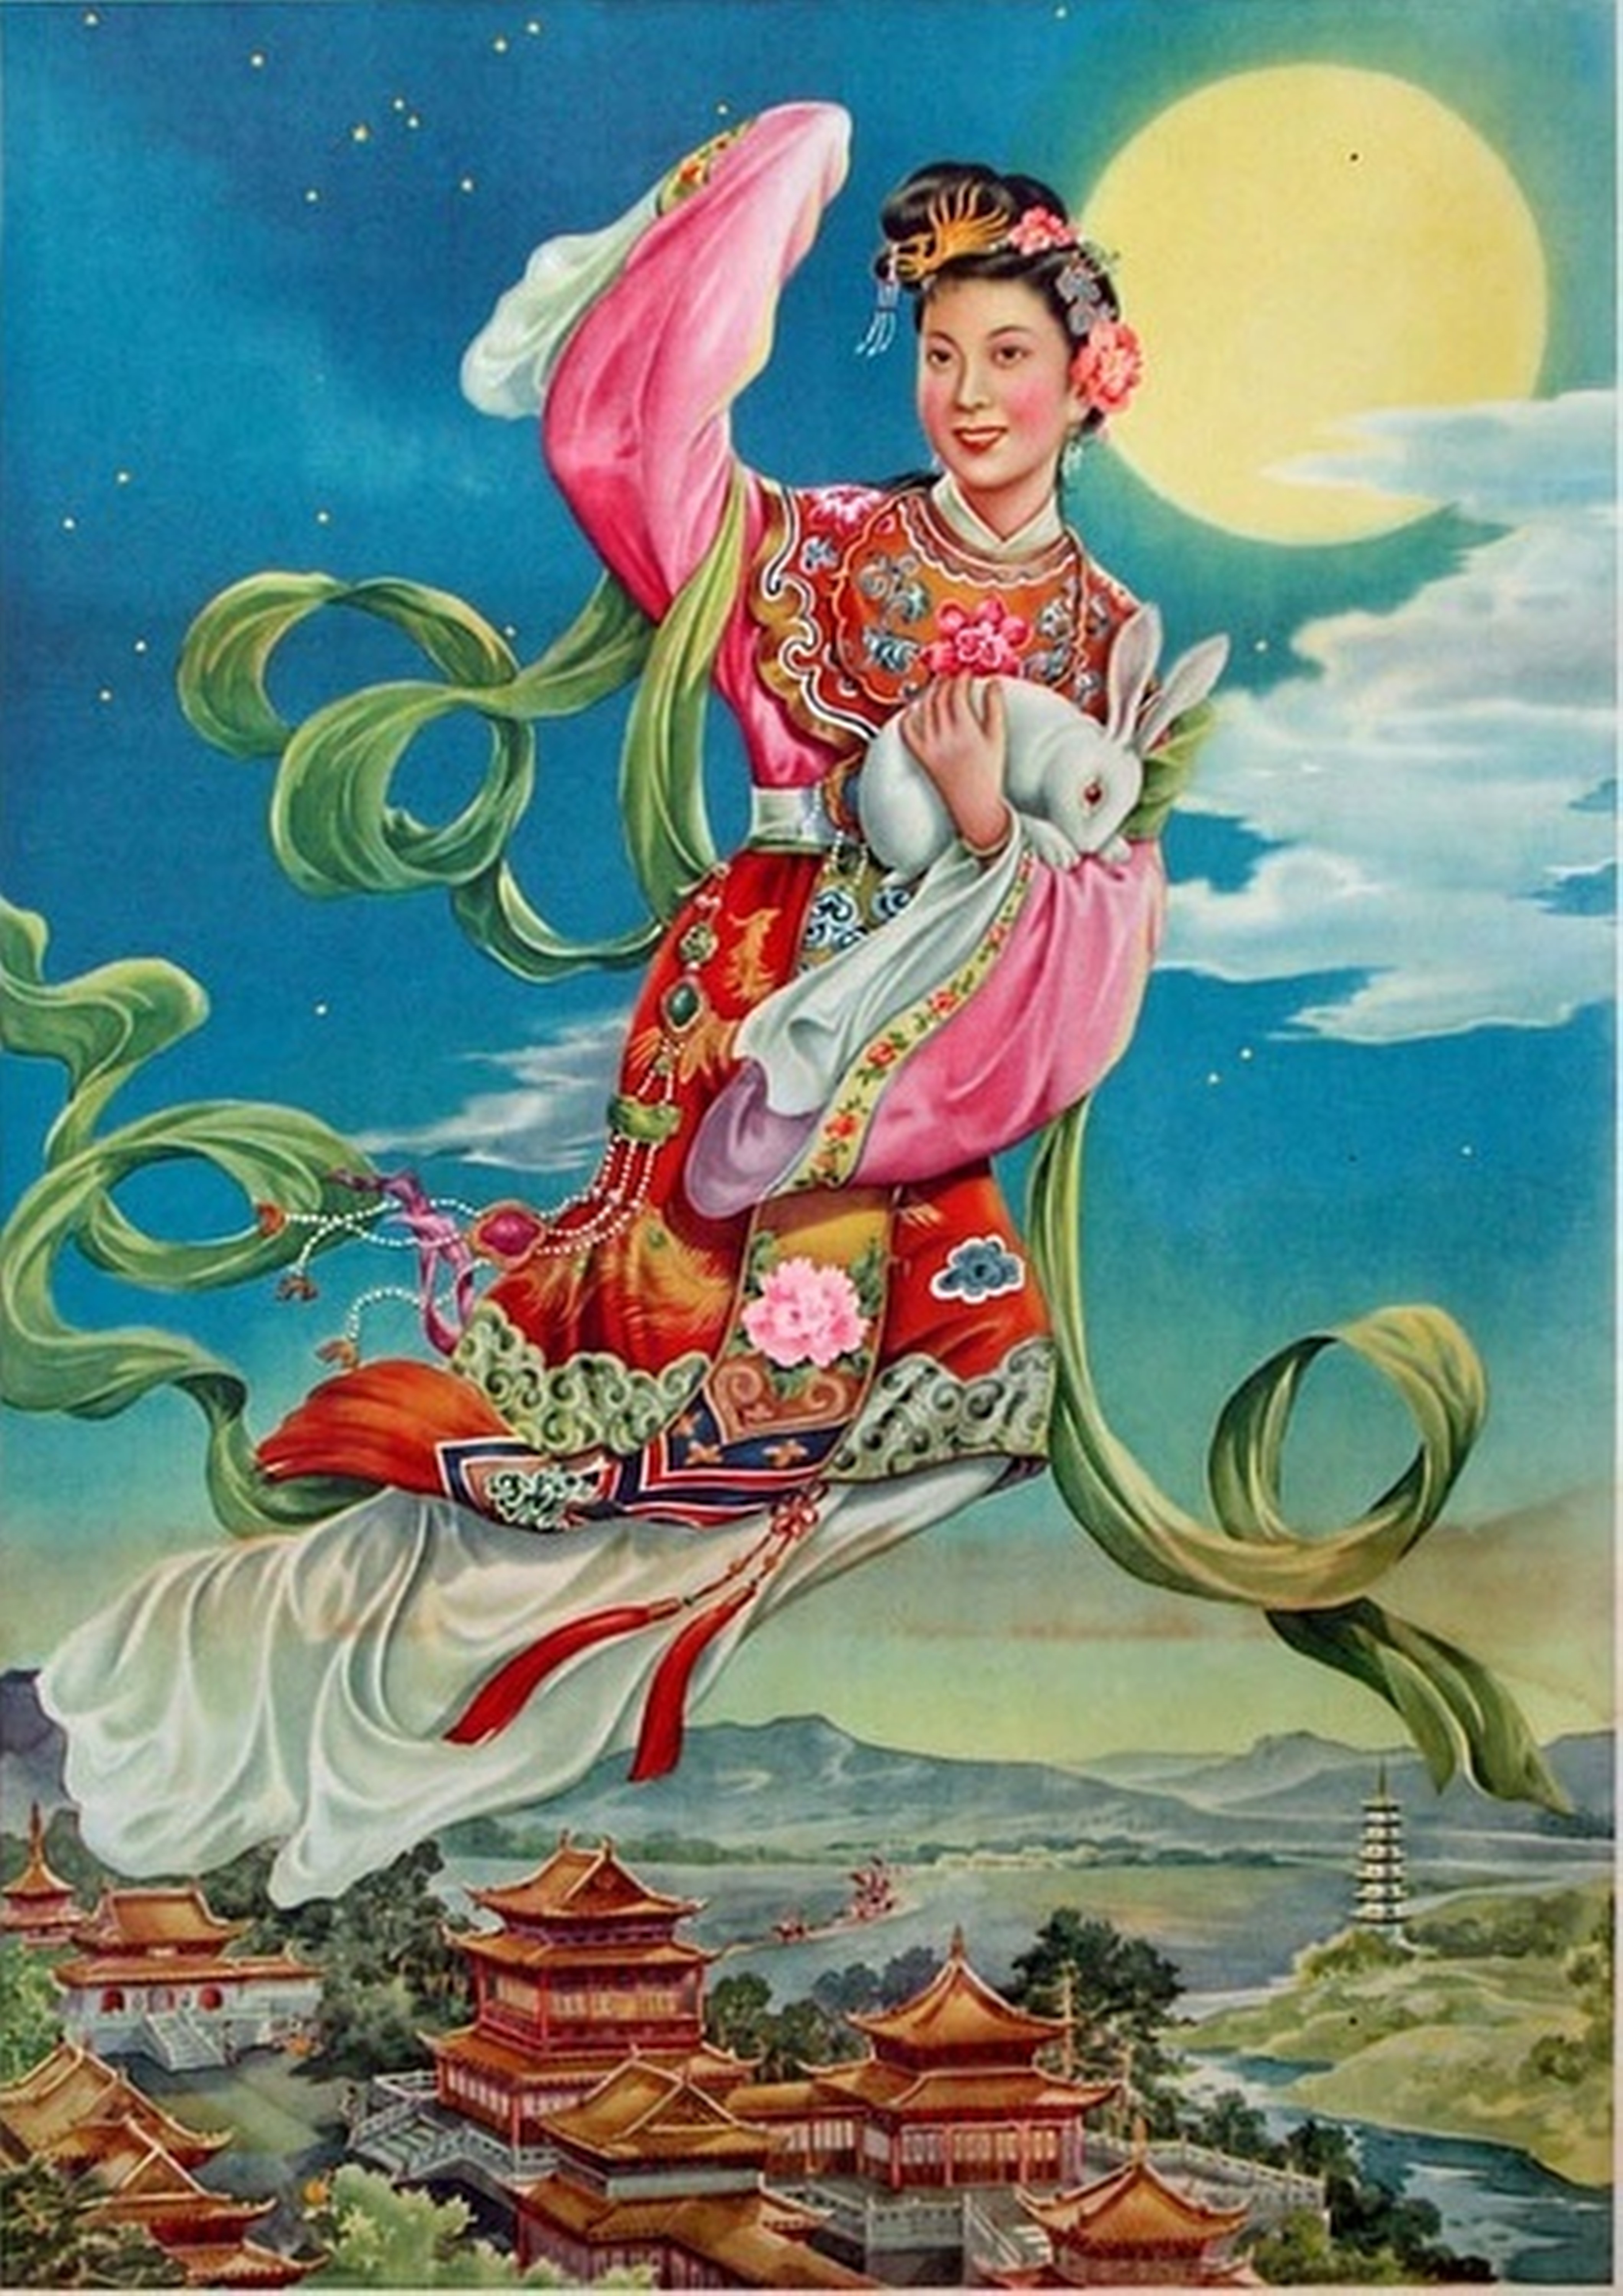 Chang’e is a Moon goddess in Chinese legend, a central character in the annual Mid-Autumn or Moon festival. Her companion is Yutu, the Jade Rabbit. Photo: Undated Handout.